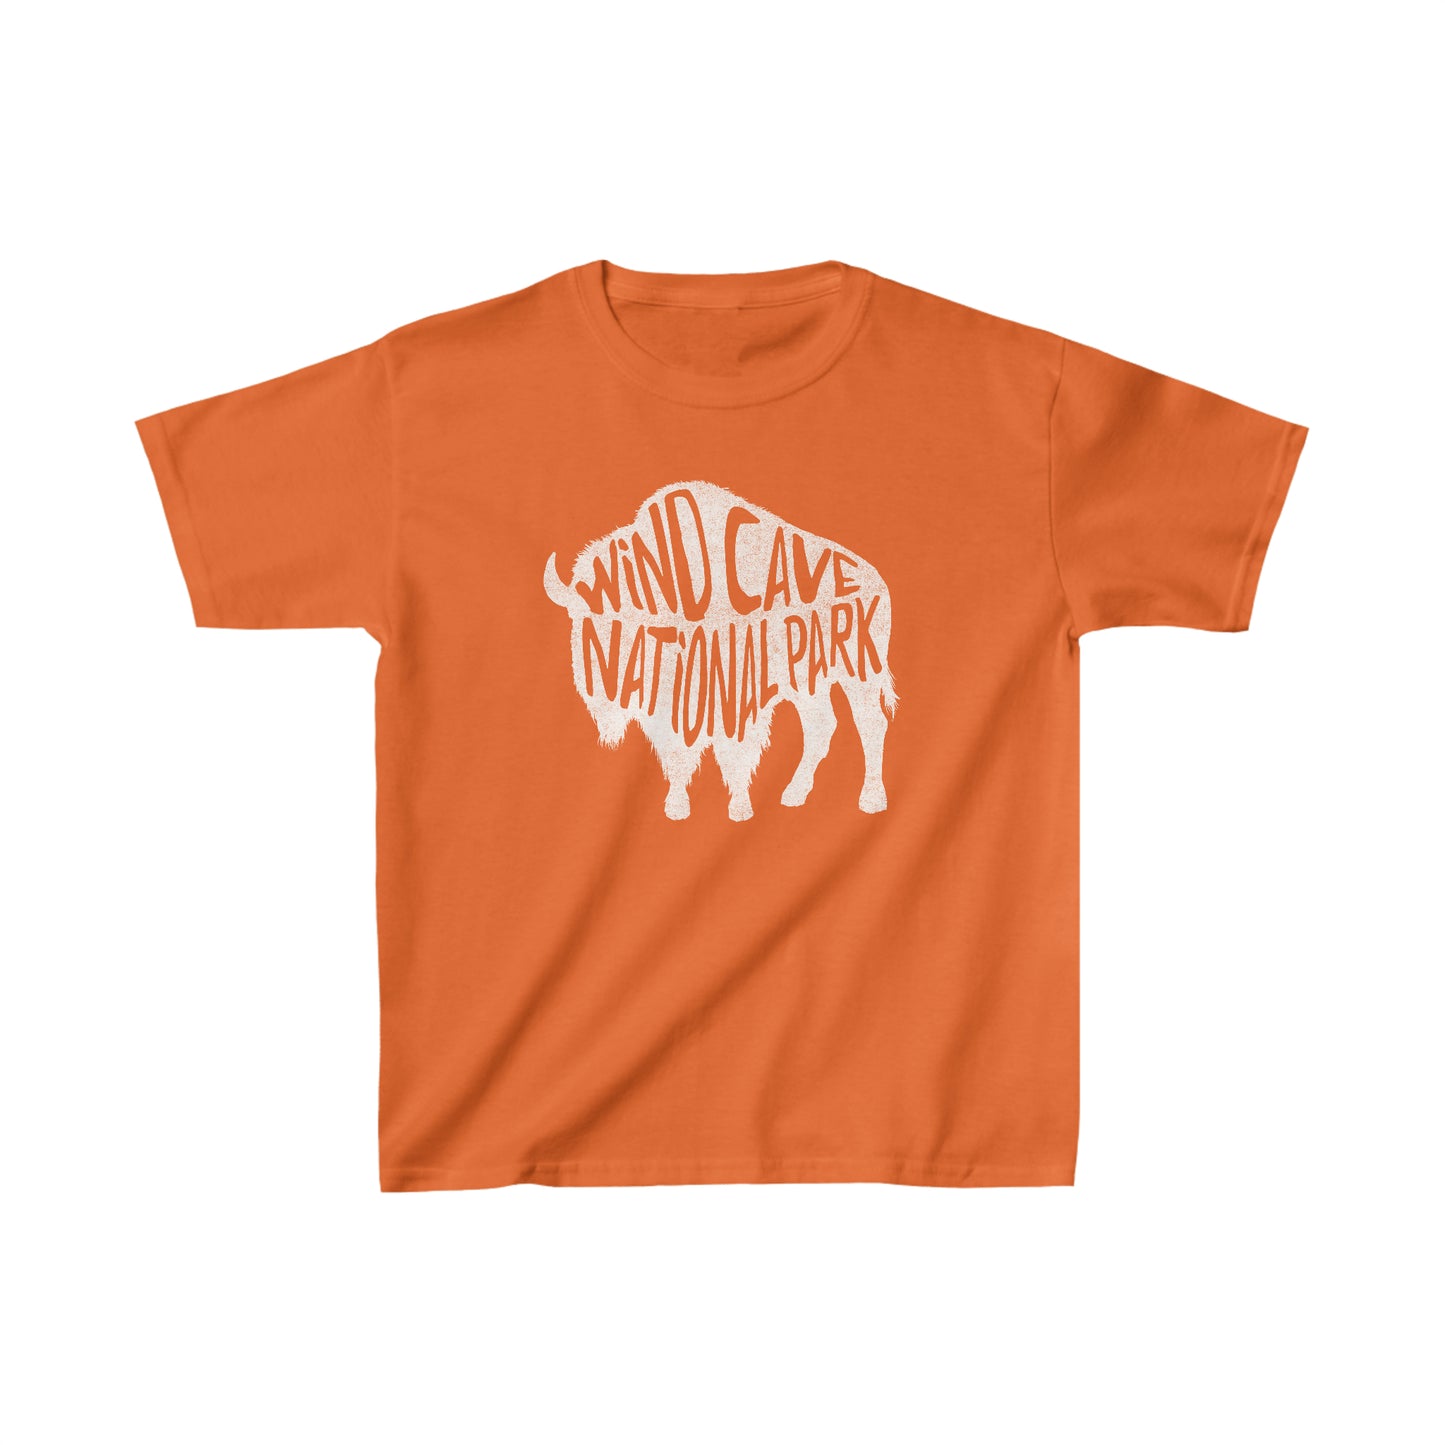 Wind Cave National Park Child T-Shirt - Bison Chunky Text